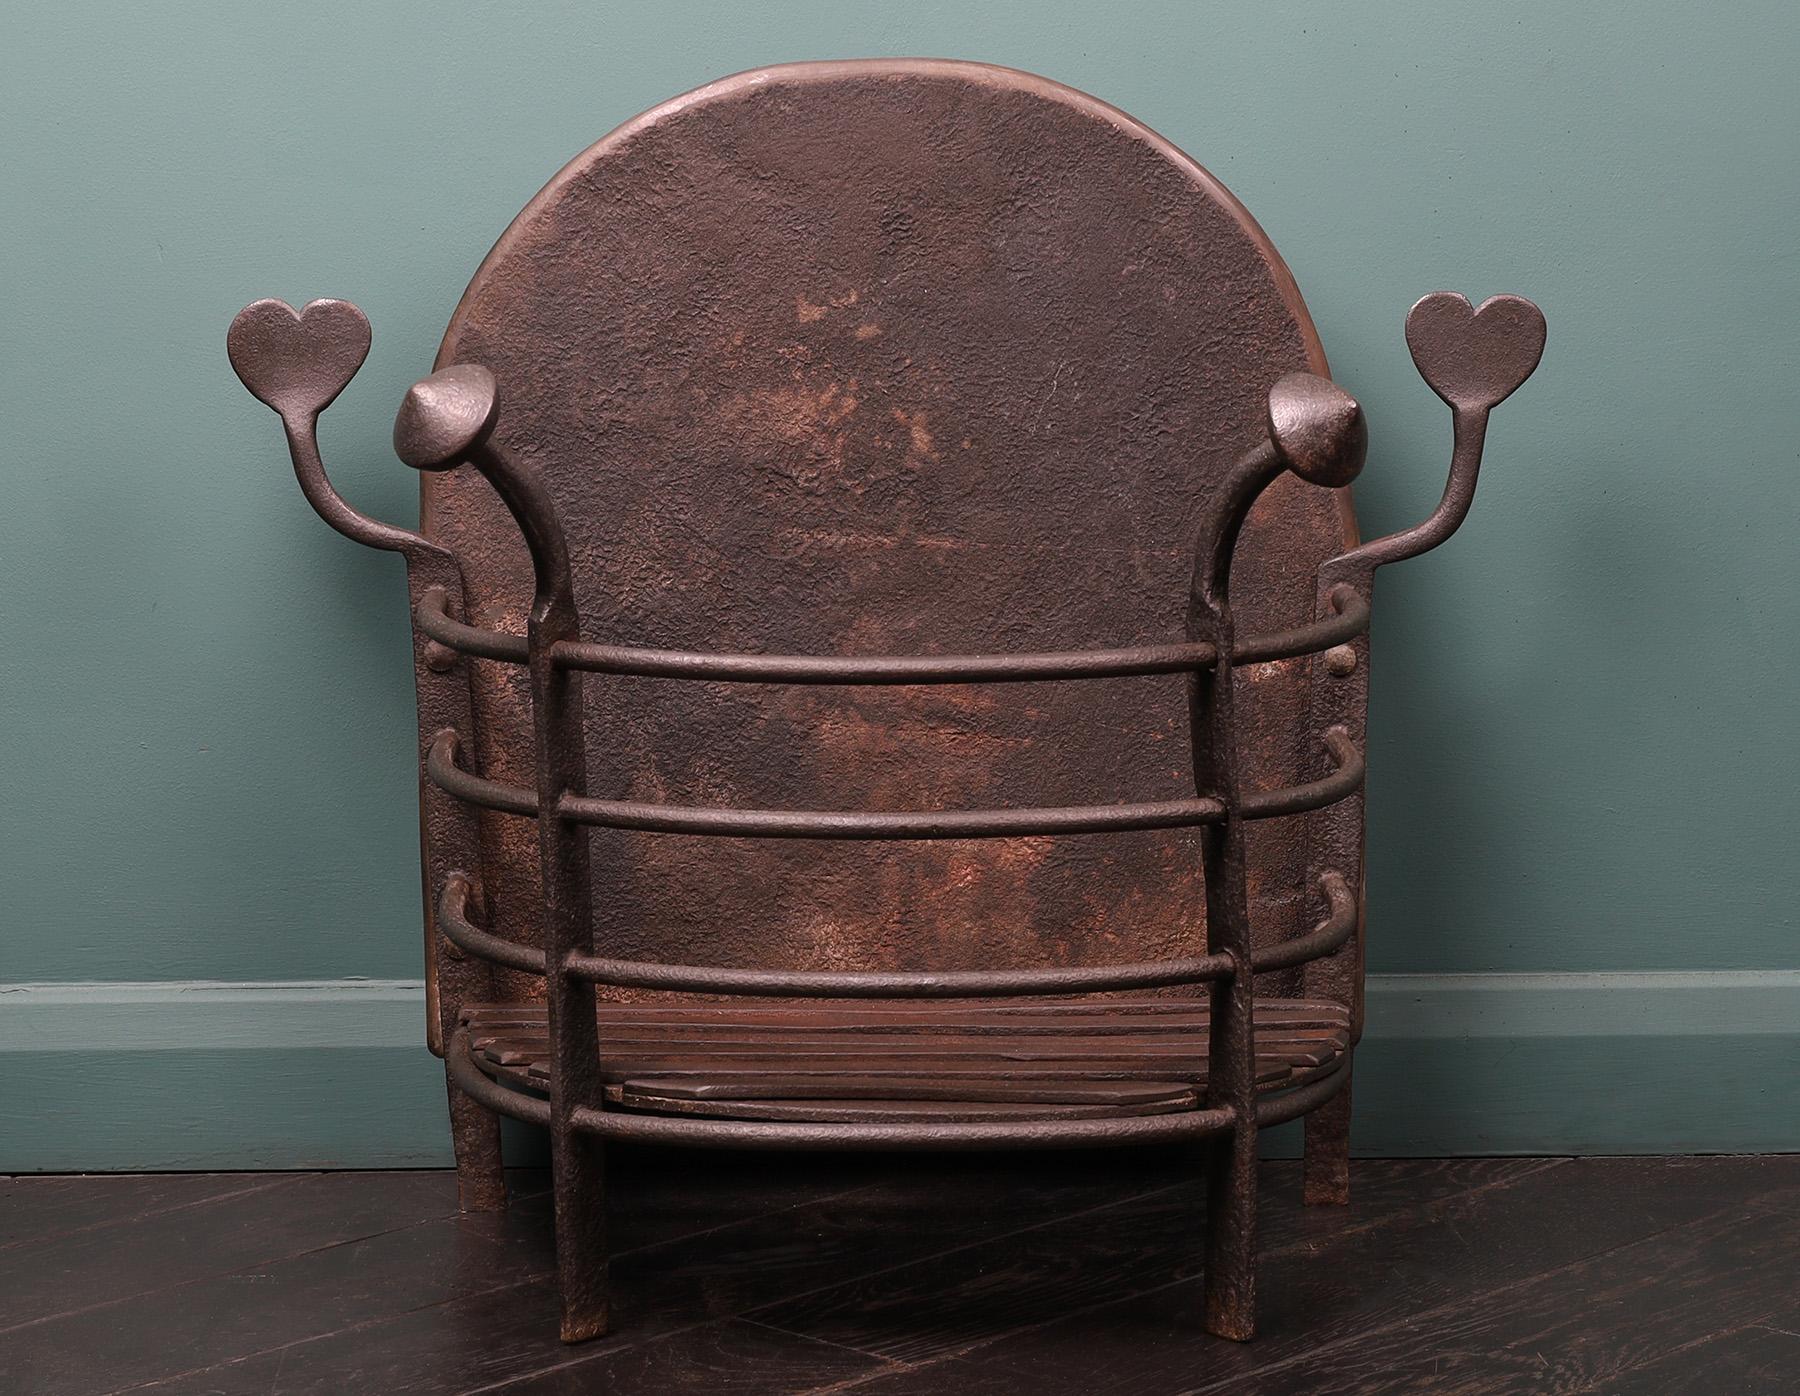 An Arts & Crafts semi-circular wrought-iron fire basket with heart-shaped finials. The railed basket with cone and heart-shaped finials that flank the arched fireback. Wax finish. 
Height of burning area: 4 7/8″
Circa 1880